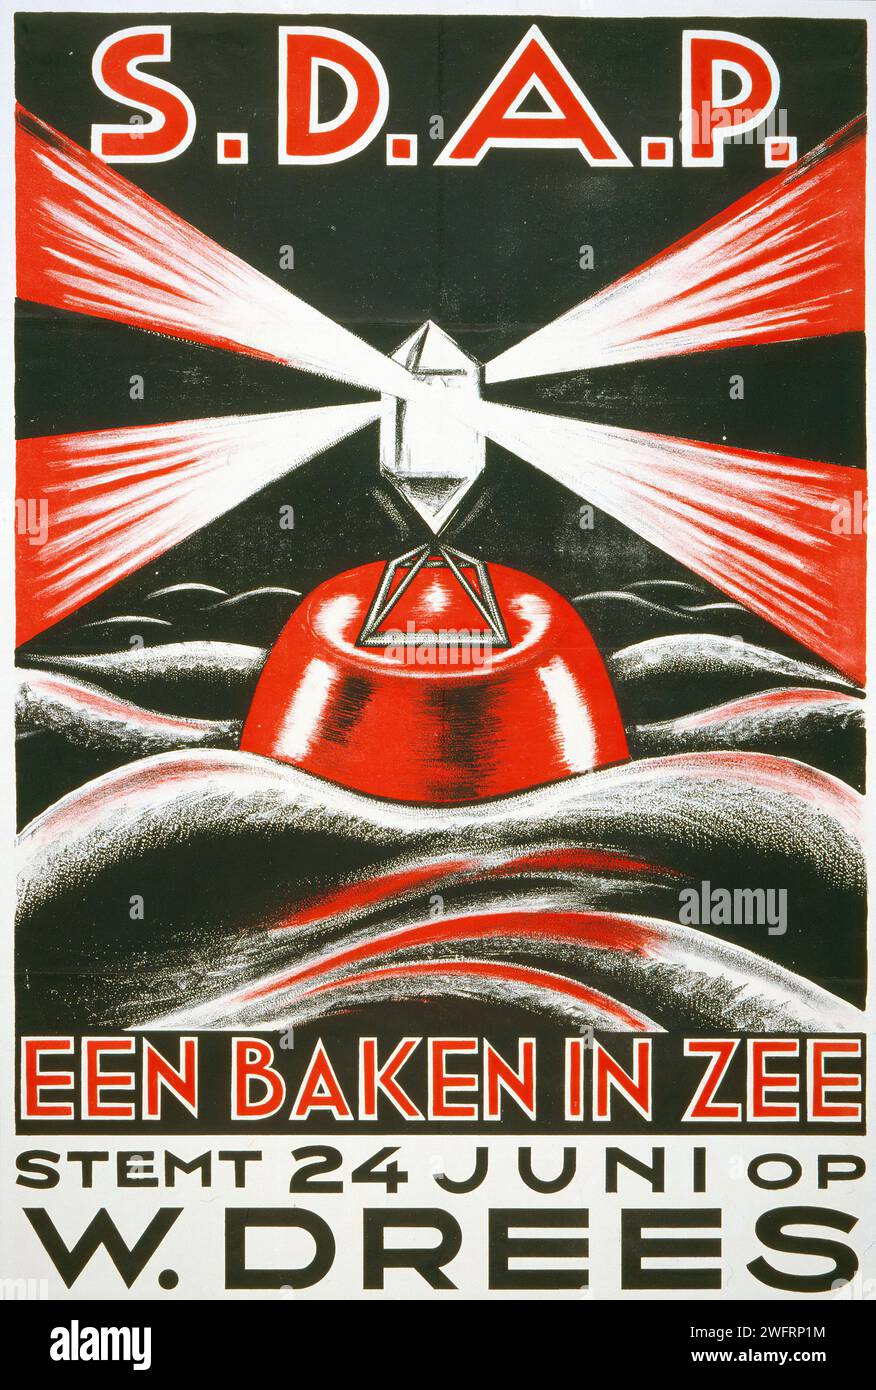 'S.D.A.P. EEN BAKEN IN ZEE stemt 24 JUNI op W. DREES' [S.D.A.P. A BEACON IN THE SEA vote 24 JUNE for W. DREES] Vintage Dutch Advertising for the Social Democratic Workers' Party (S.D.A.P.), featuring a bold graphic of a lighthouse with rays of light, predominantly in red, white, and black. The poster's style is reminiscent of Constructivism, with geometric shapes and strong contrasts. Stock Photo